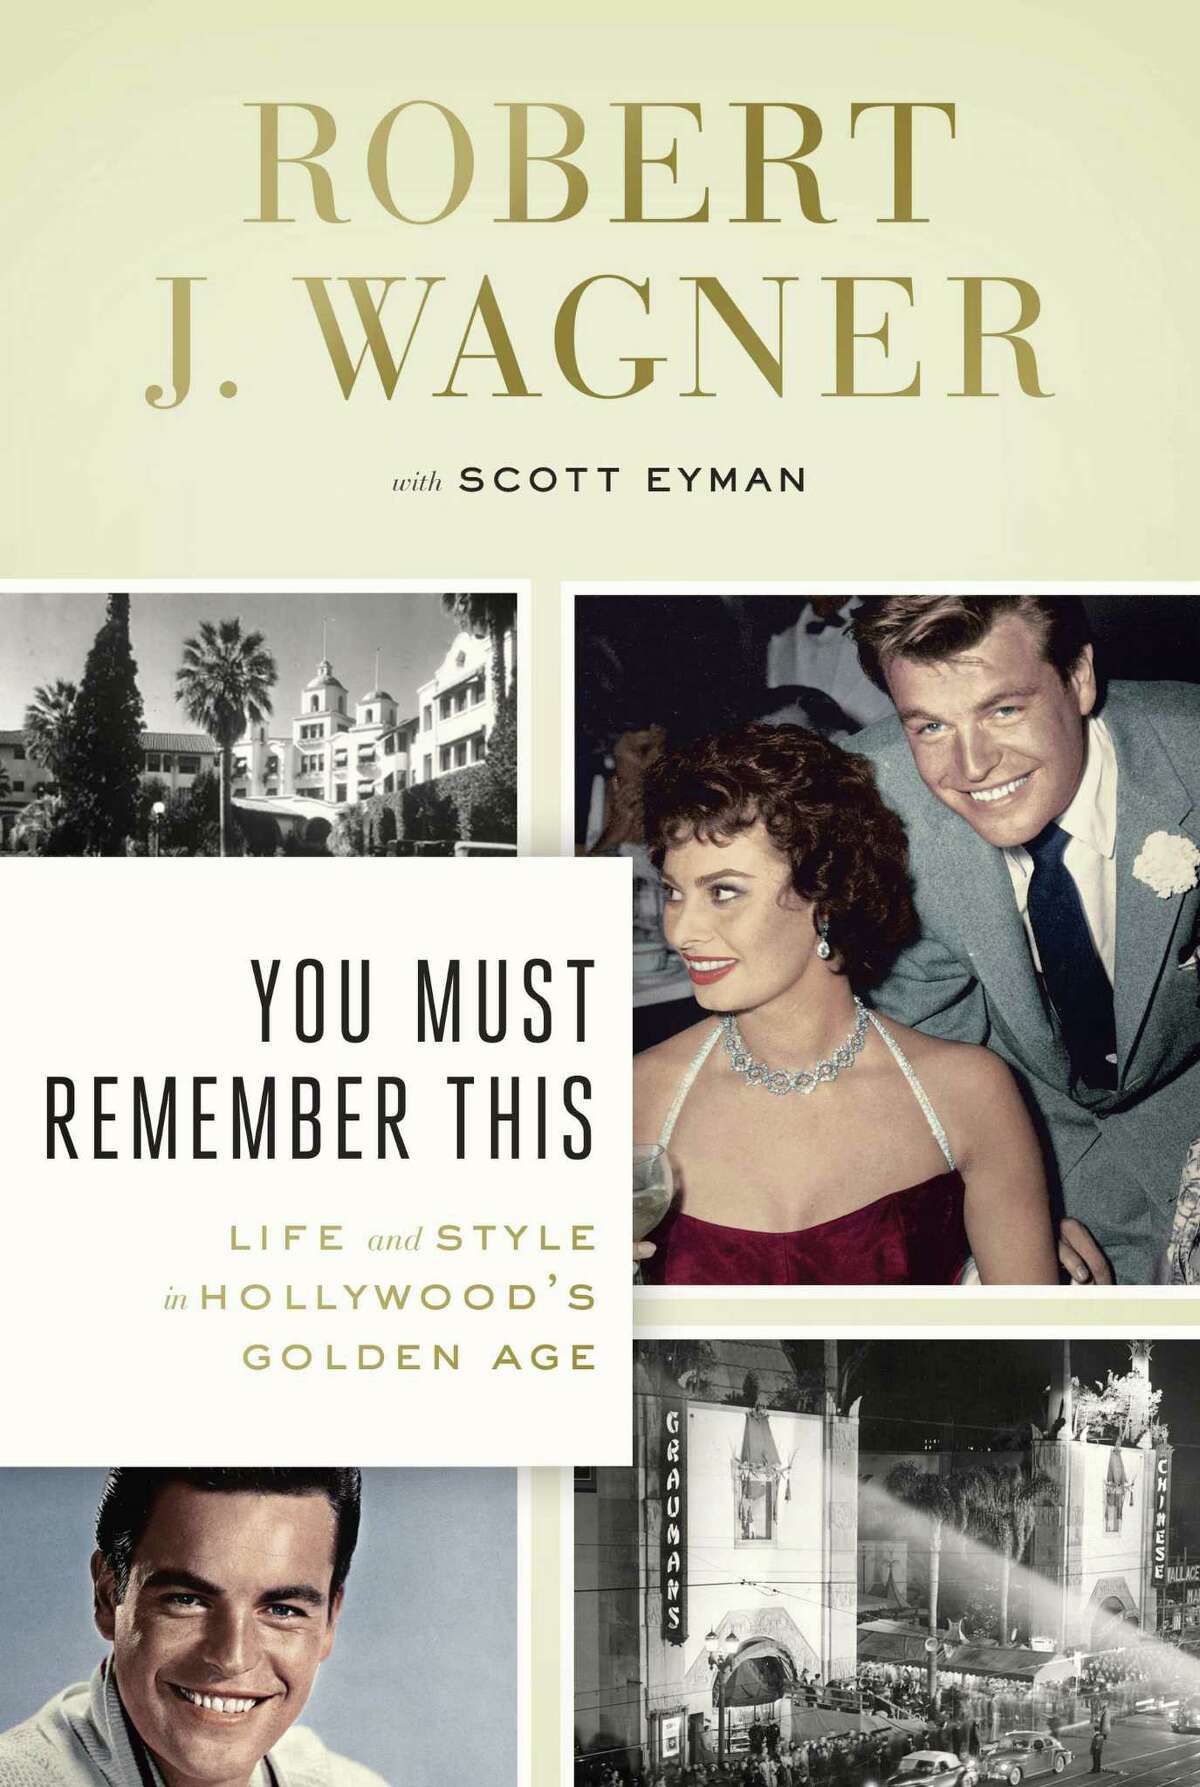 Robert Wagner will be at Greenwich Library on March 13 to discuss his new book, "You Must Remember This: Life and Style in Hollywoodís Goldenv Age."